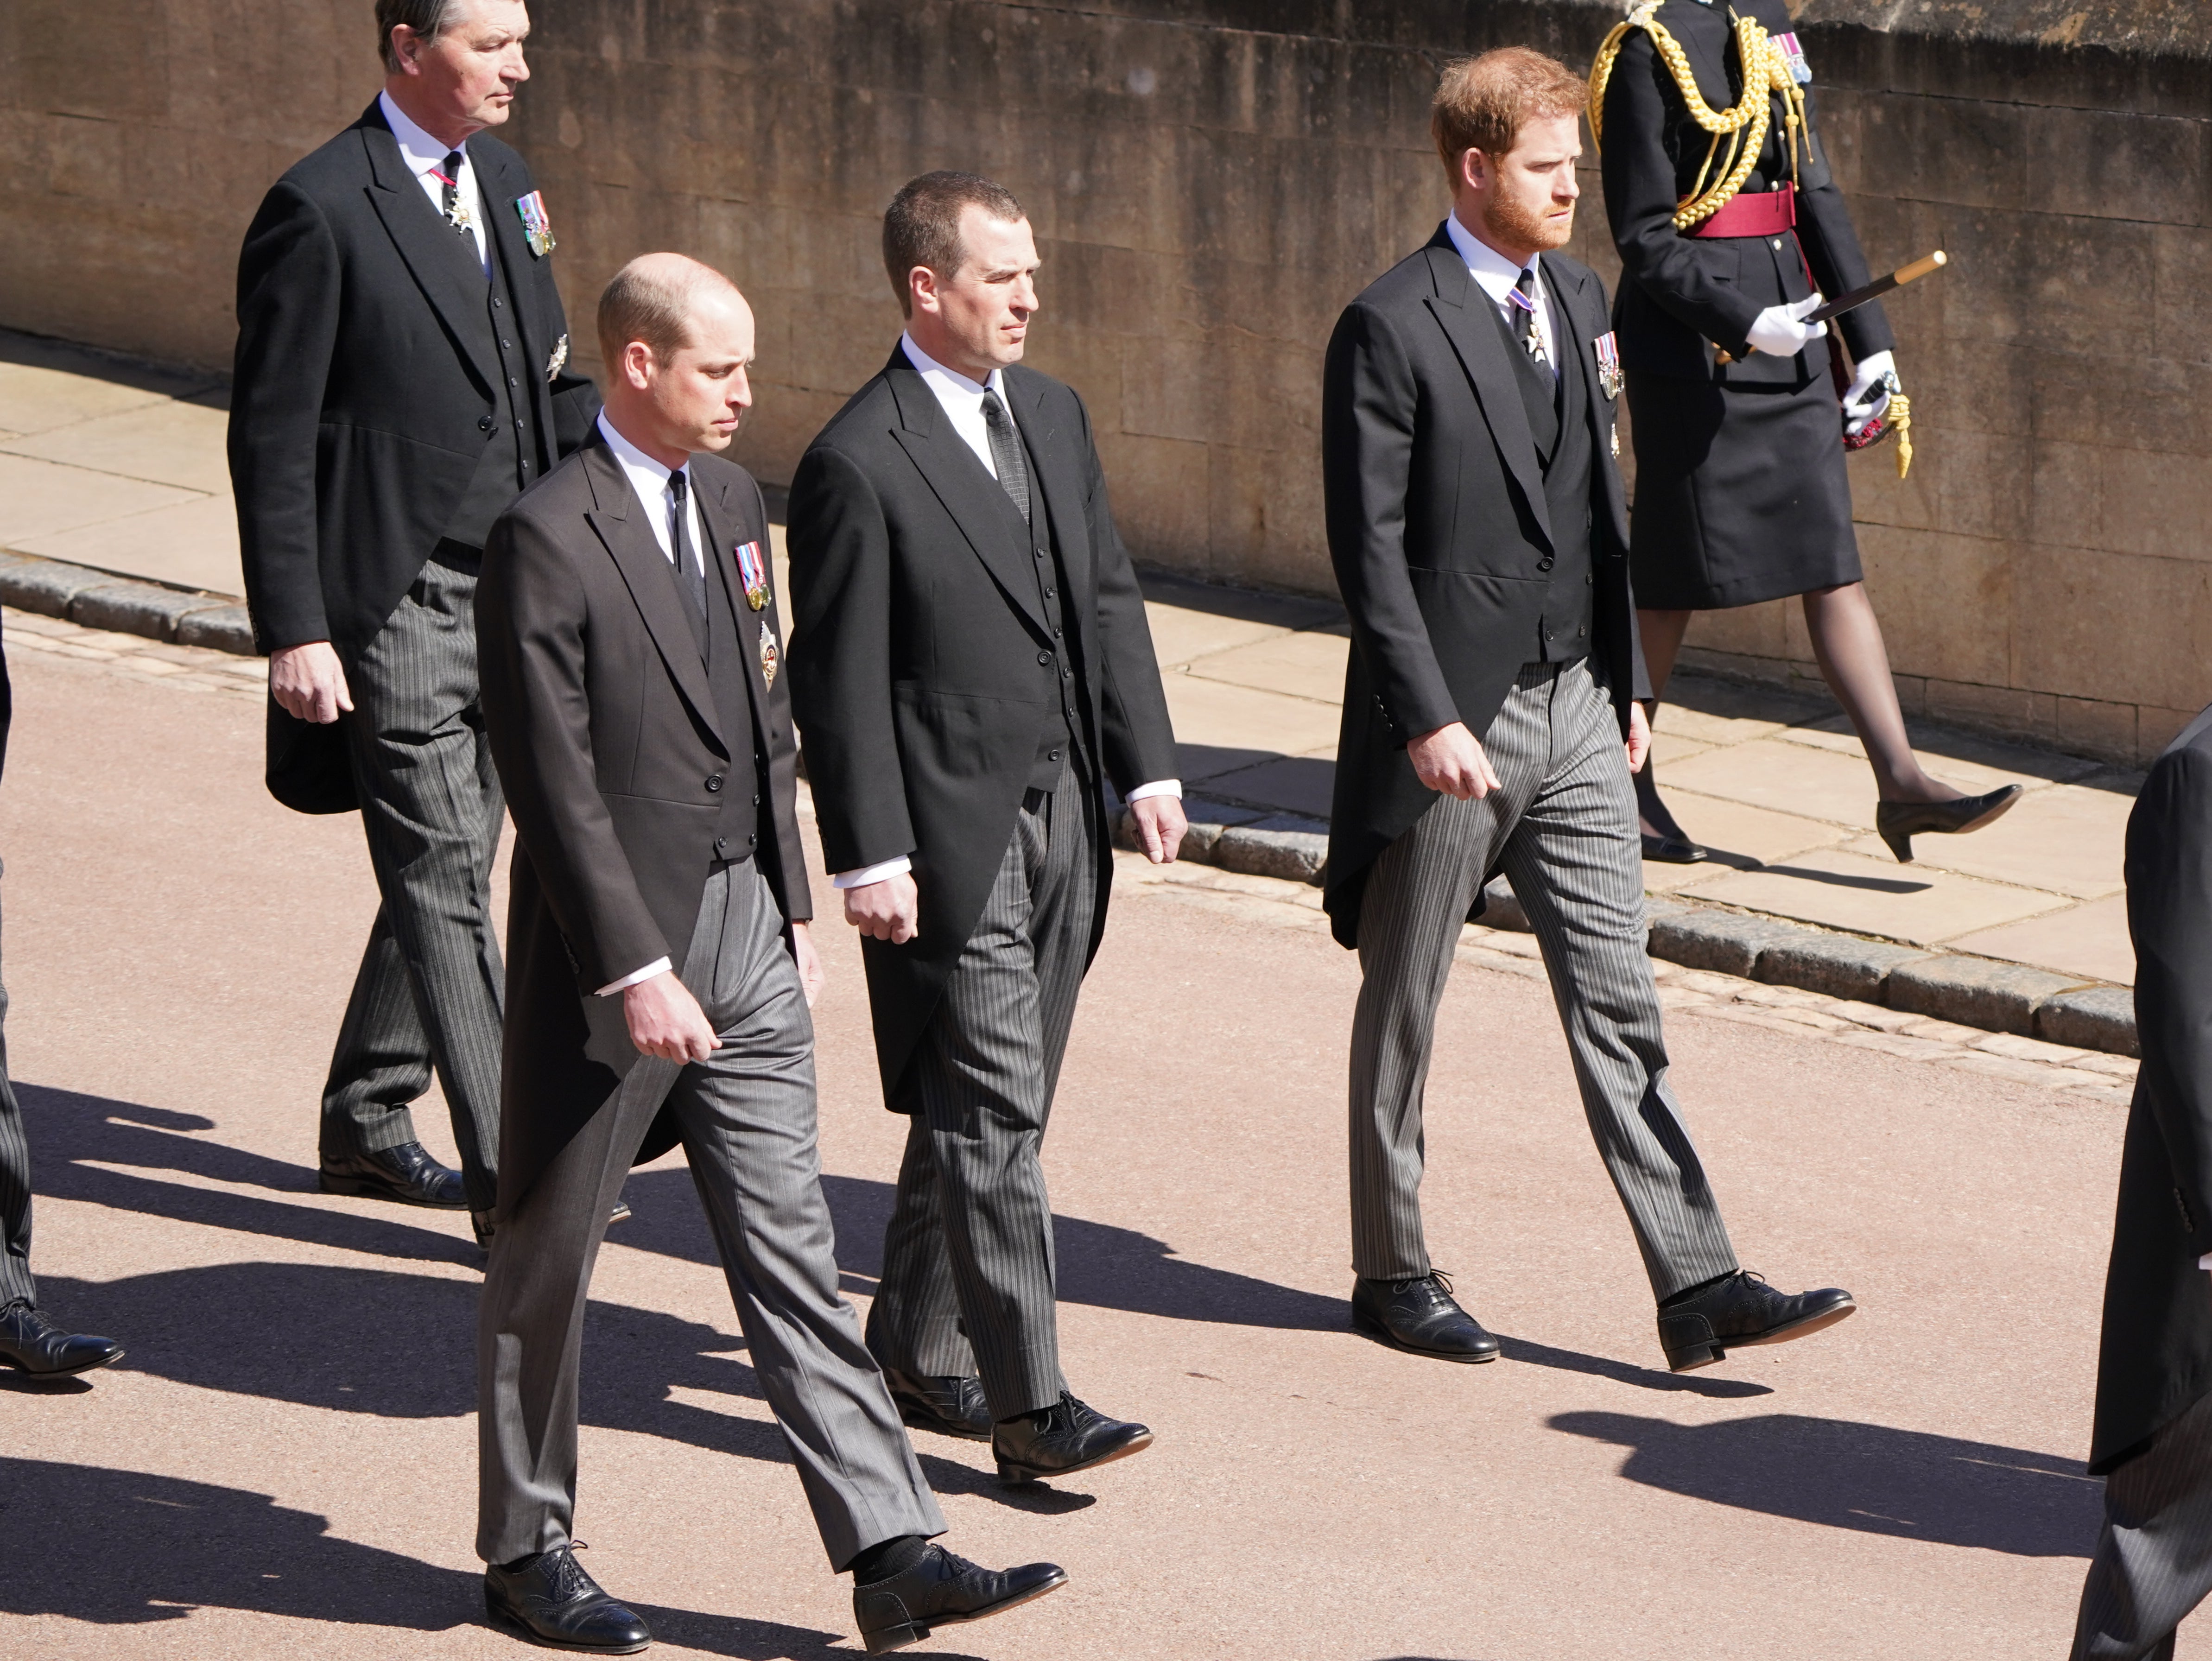 Peter Phillips walked between the Dukes of Cambridge and Sussex at their grandfather’s funeral